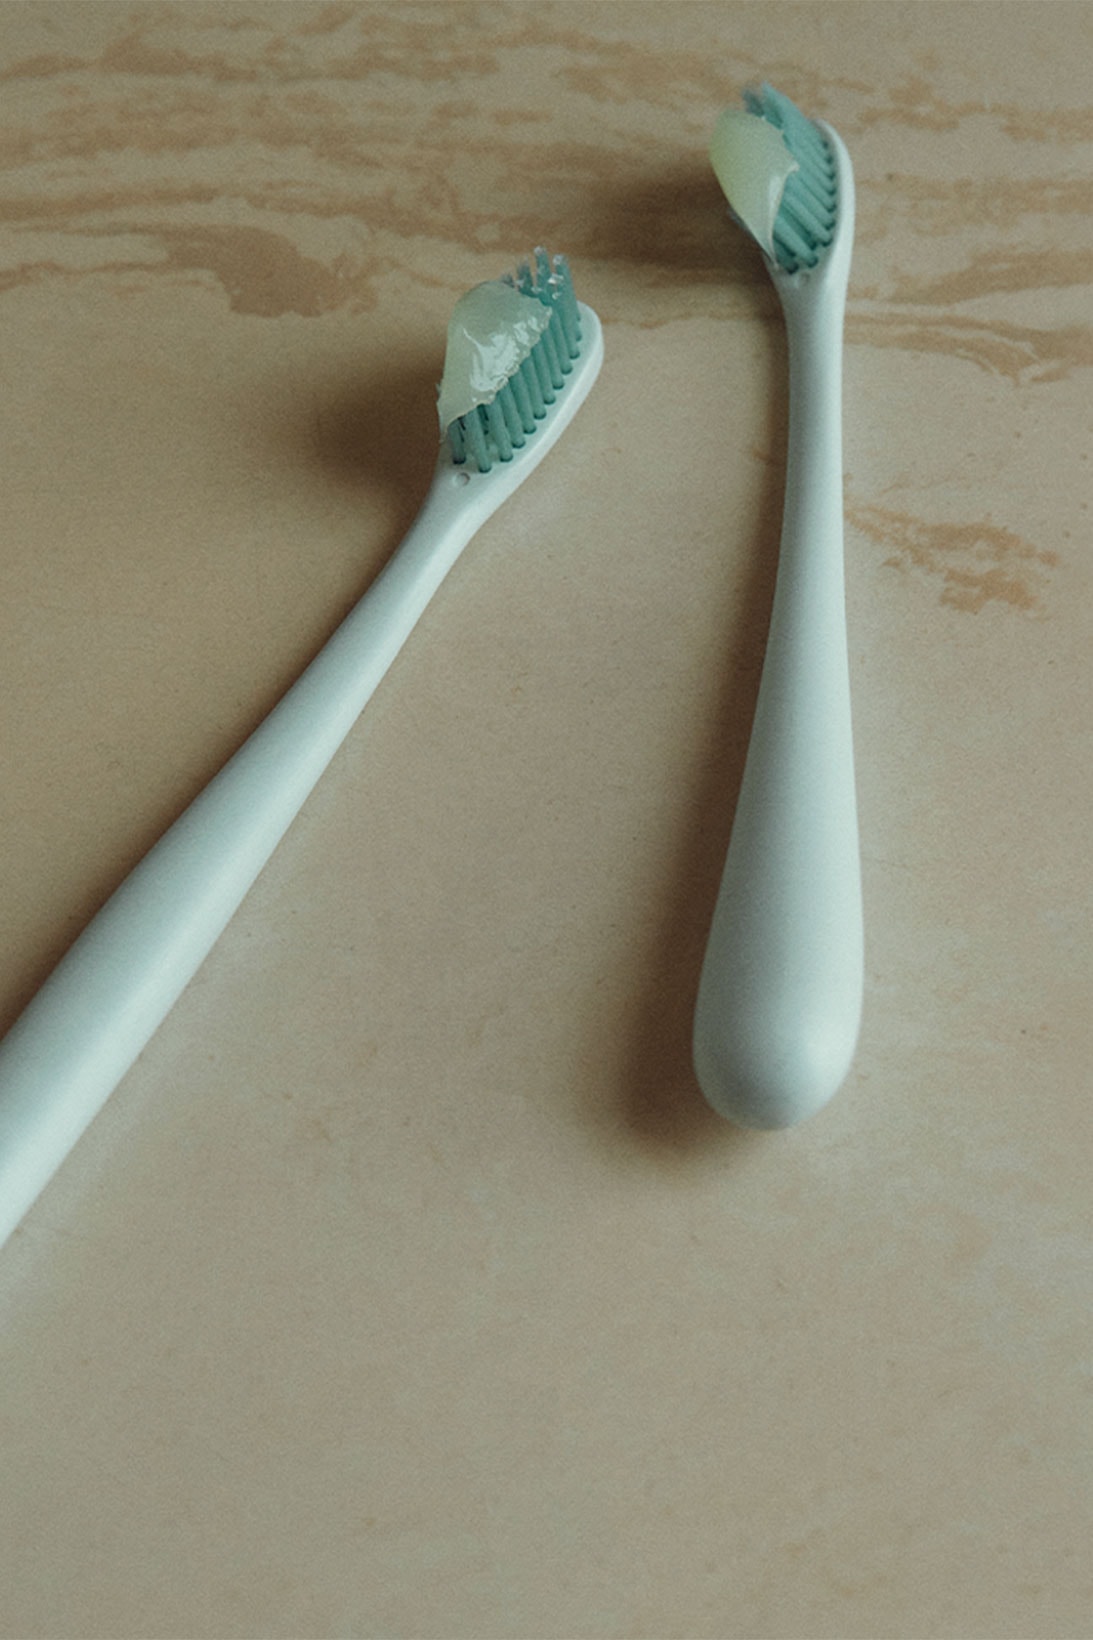 HAYAN Toothbrushes Biodegradable Sustainable Design Launch Price 